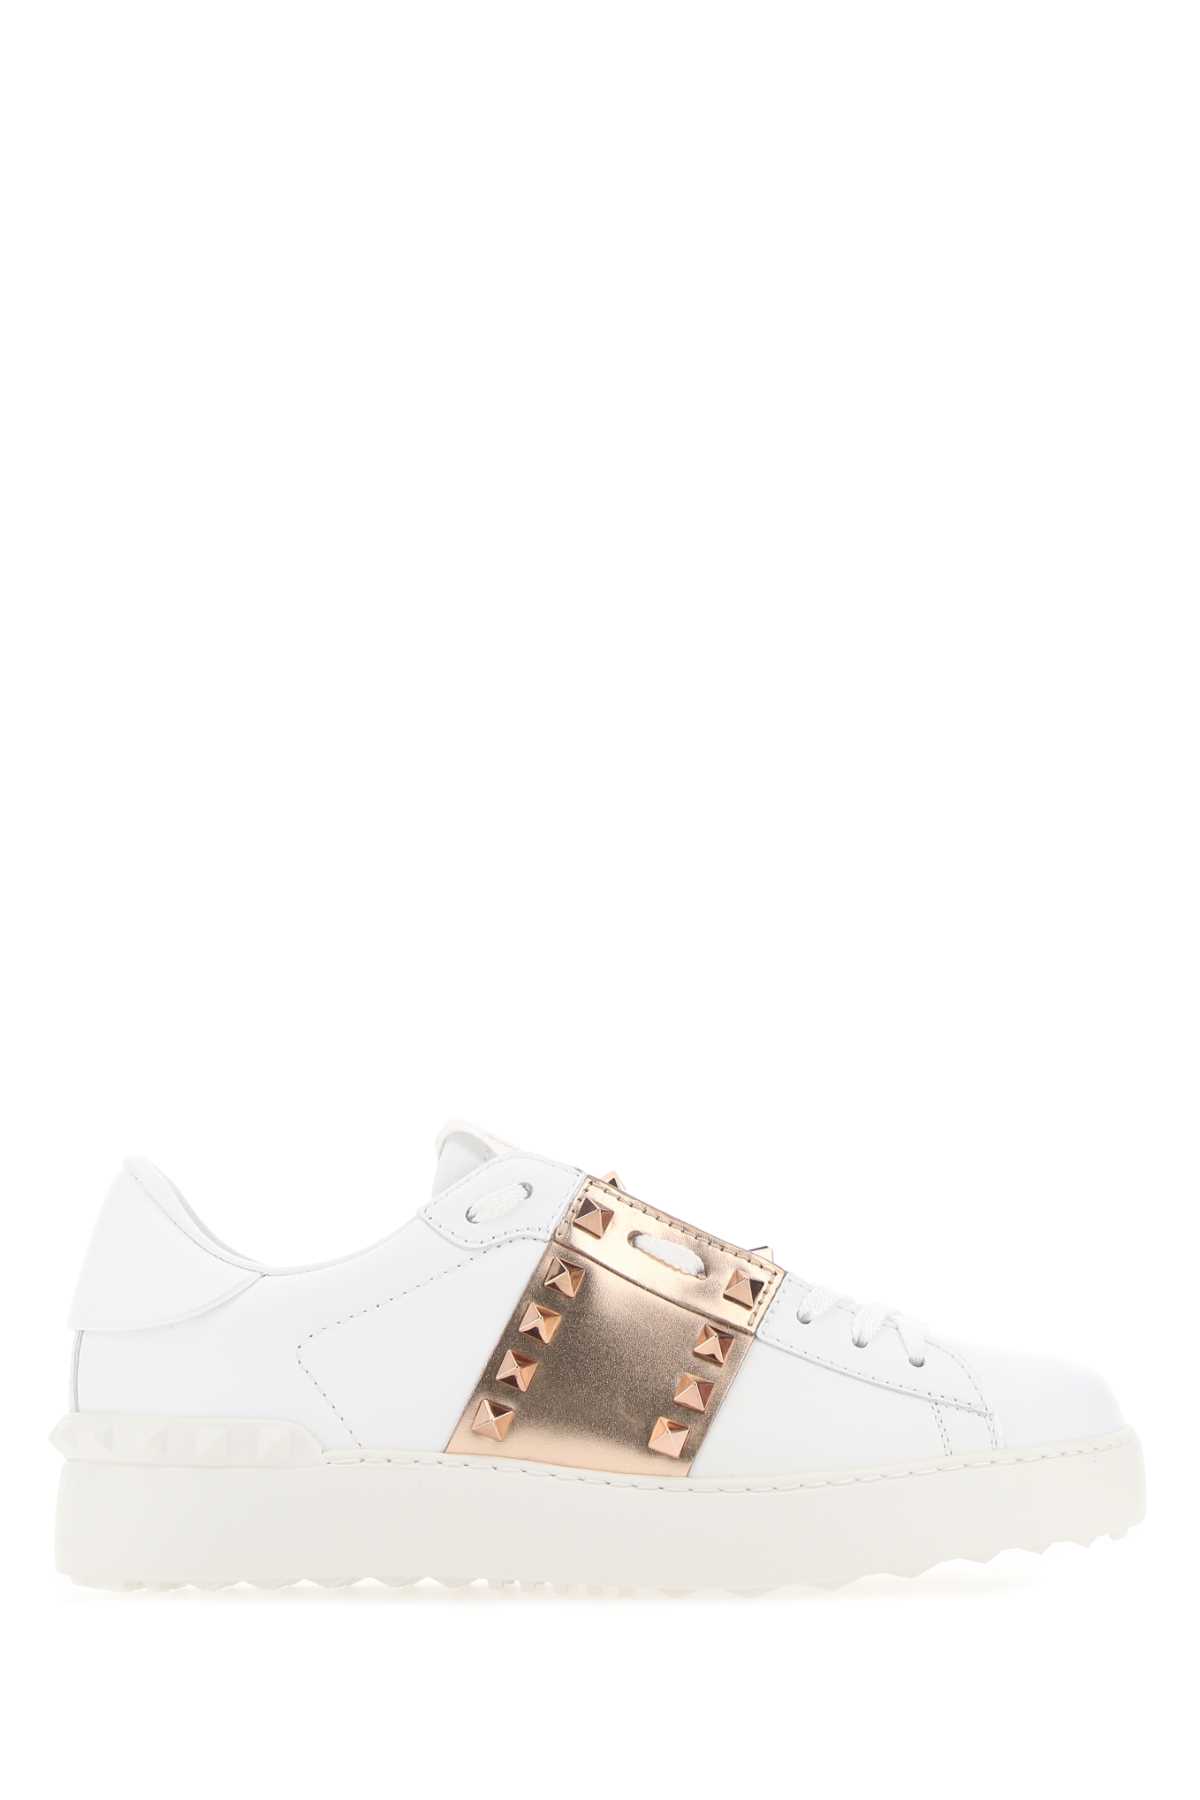 Shop Valentino White Leather Rockstud Untitled Sneakers With Gold Rose Band In Biancoramebianco